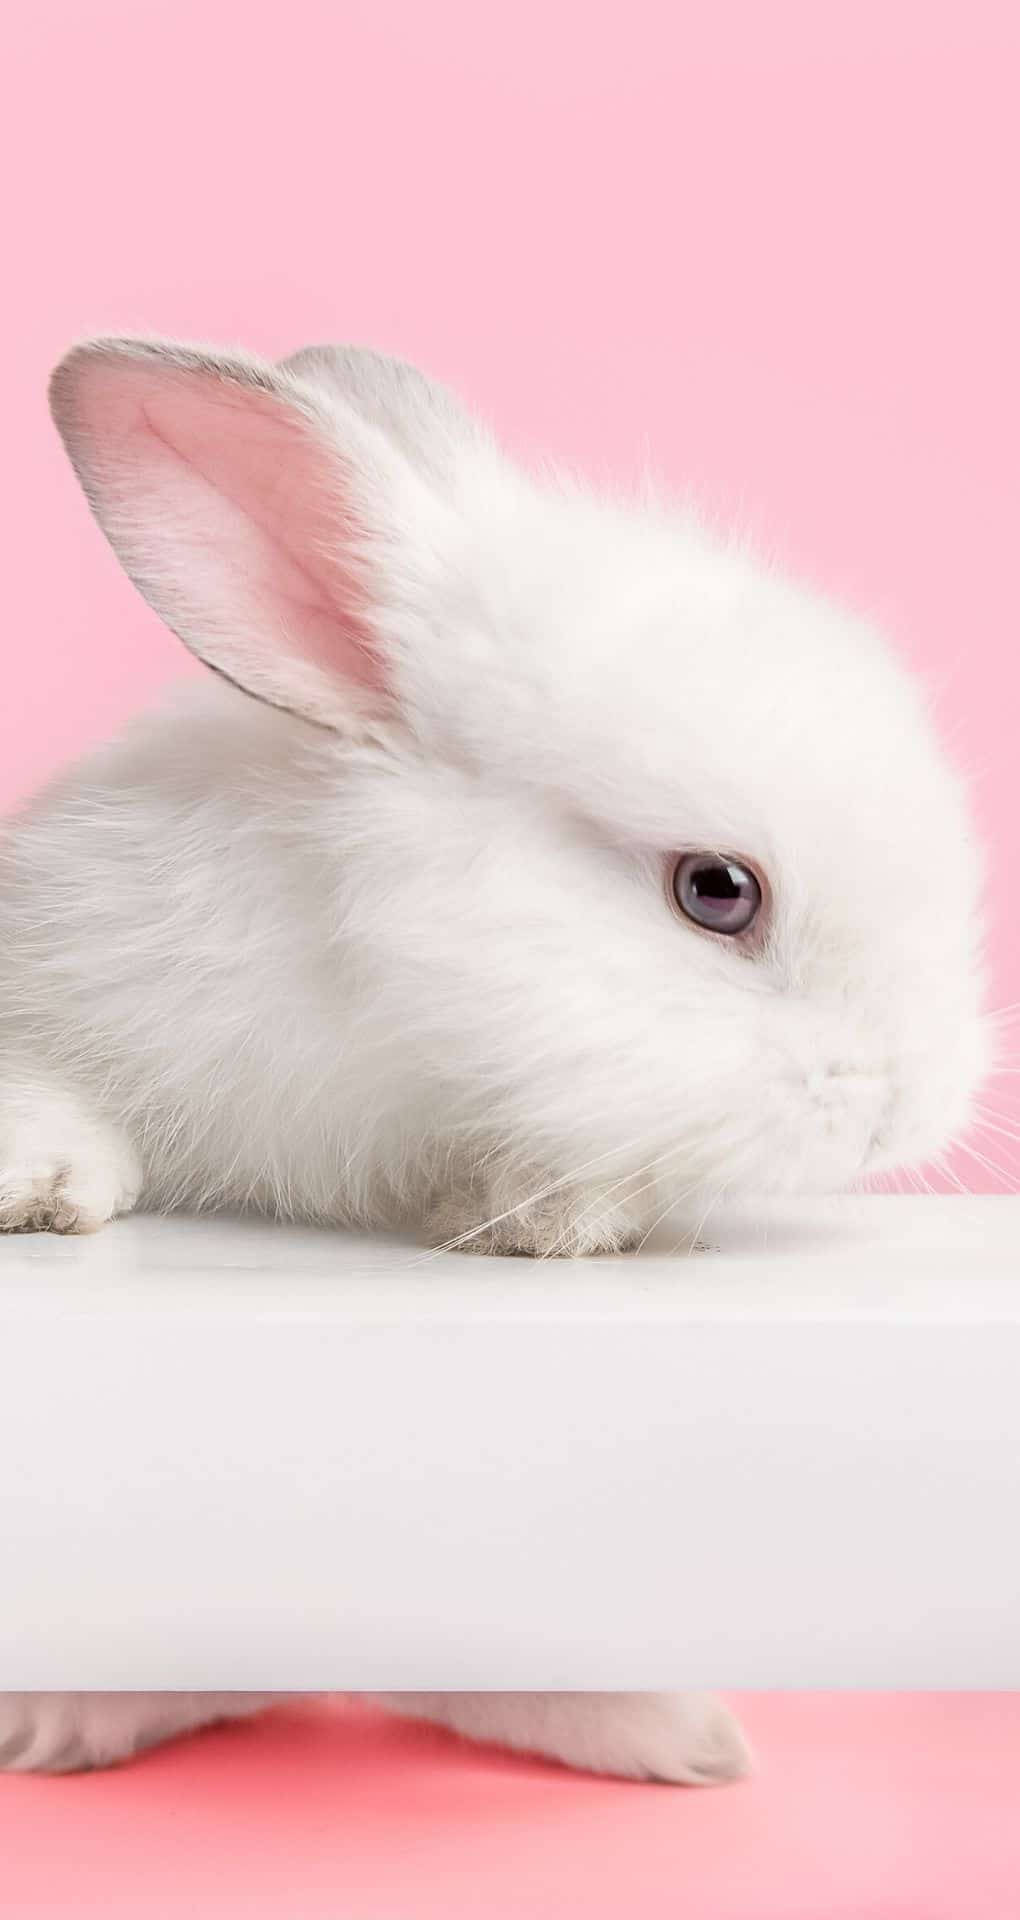 Charming White Bunny On Pink - Iphone Wallpaper Background